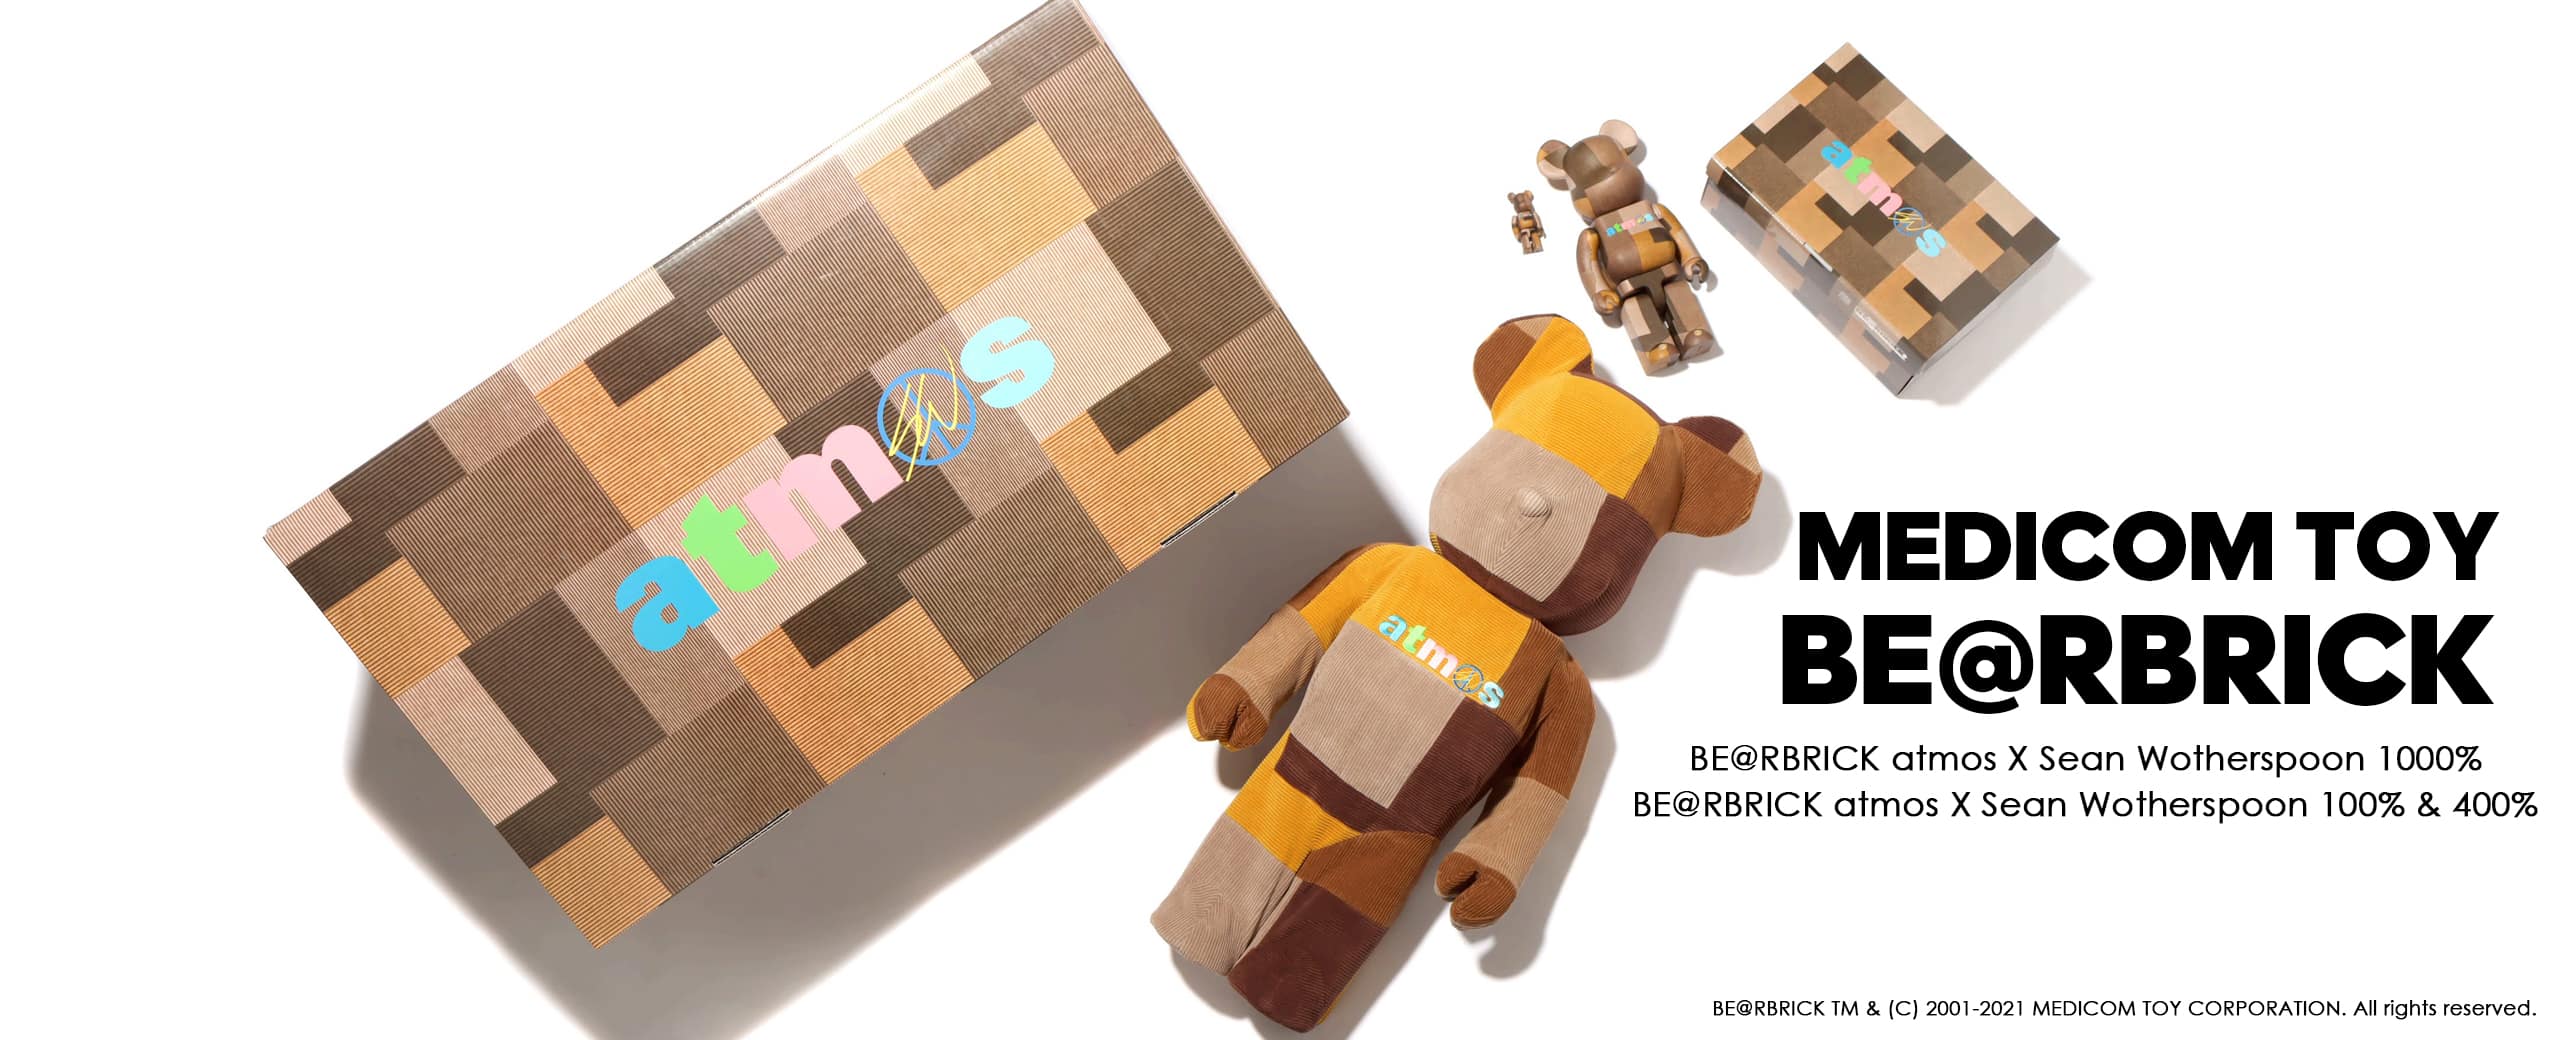 MEDICOMTOY BE@R BRICK atmos SEAN WOTHERSPOON